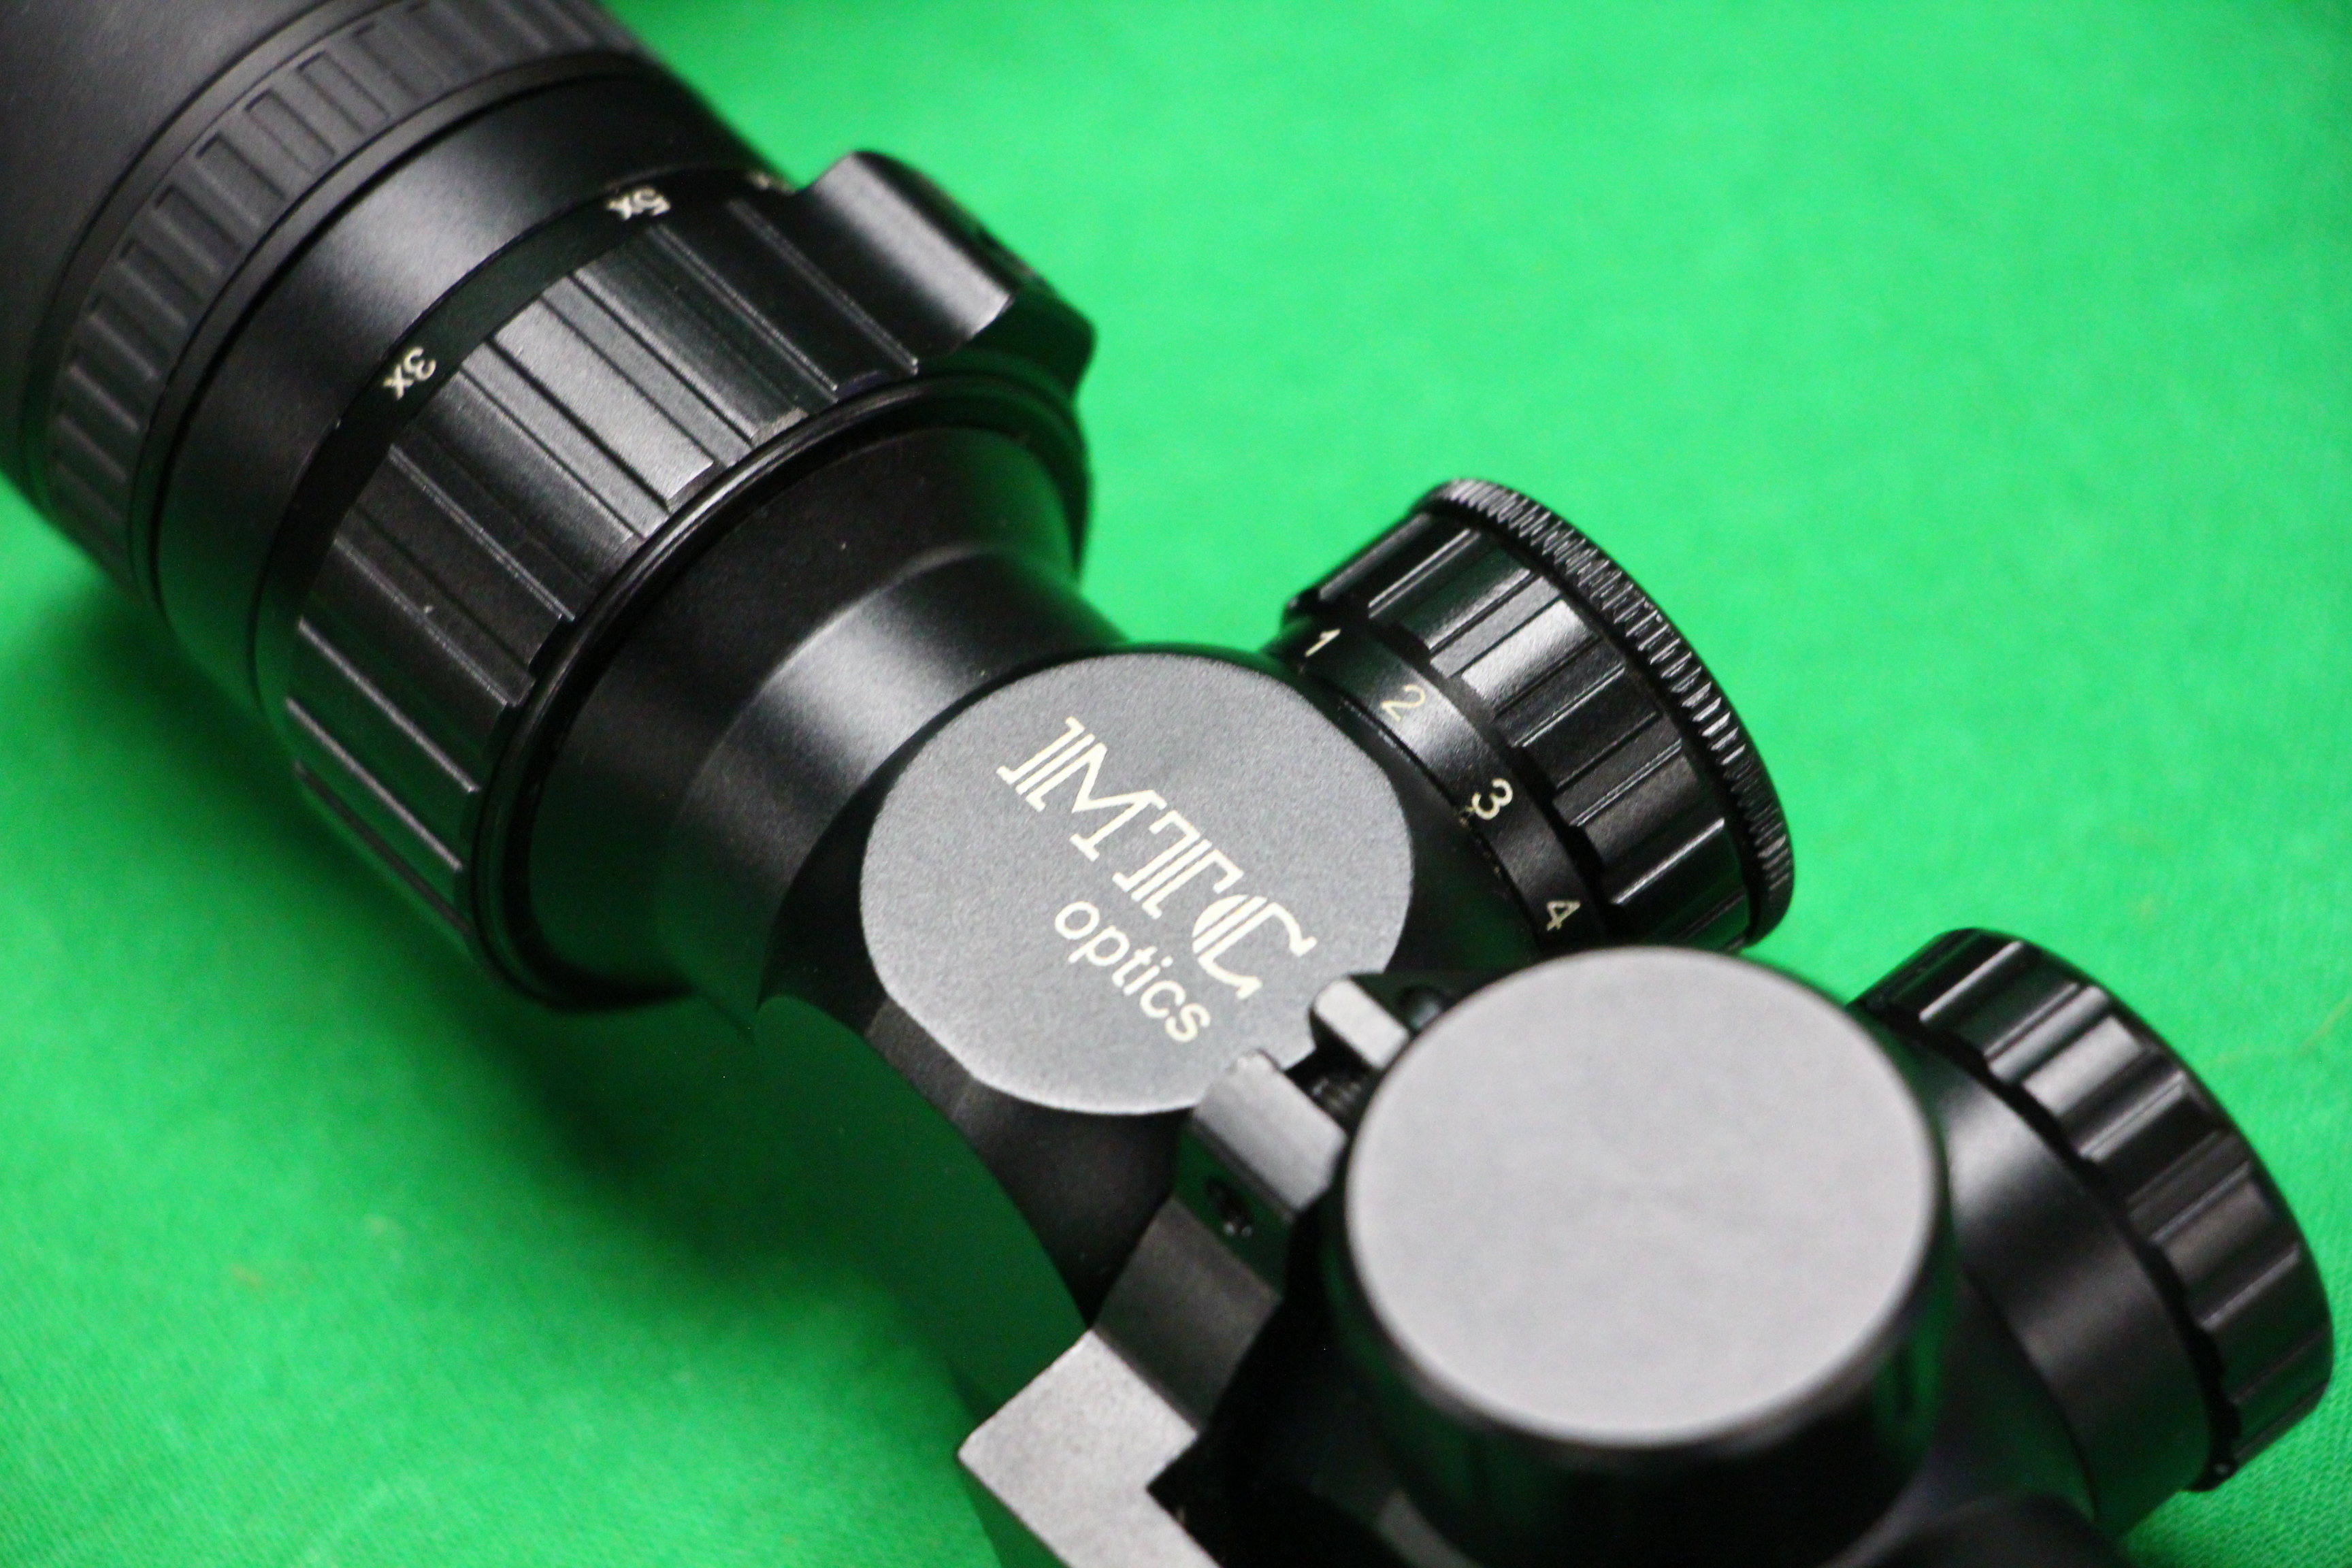 A BOXED MTC OPTICS VIPER X SERIES CONNECT 3-12 X32 RIFLE SCOPE WITH MOUNTS - Image 7 of 10